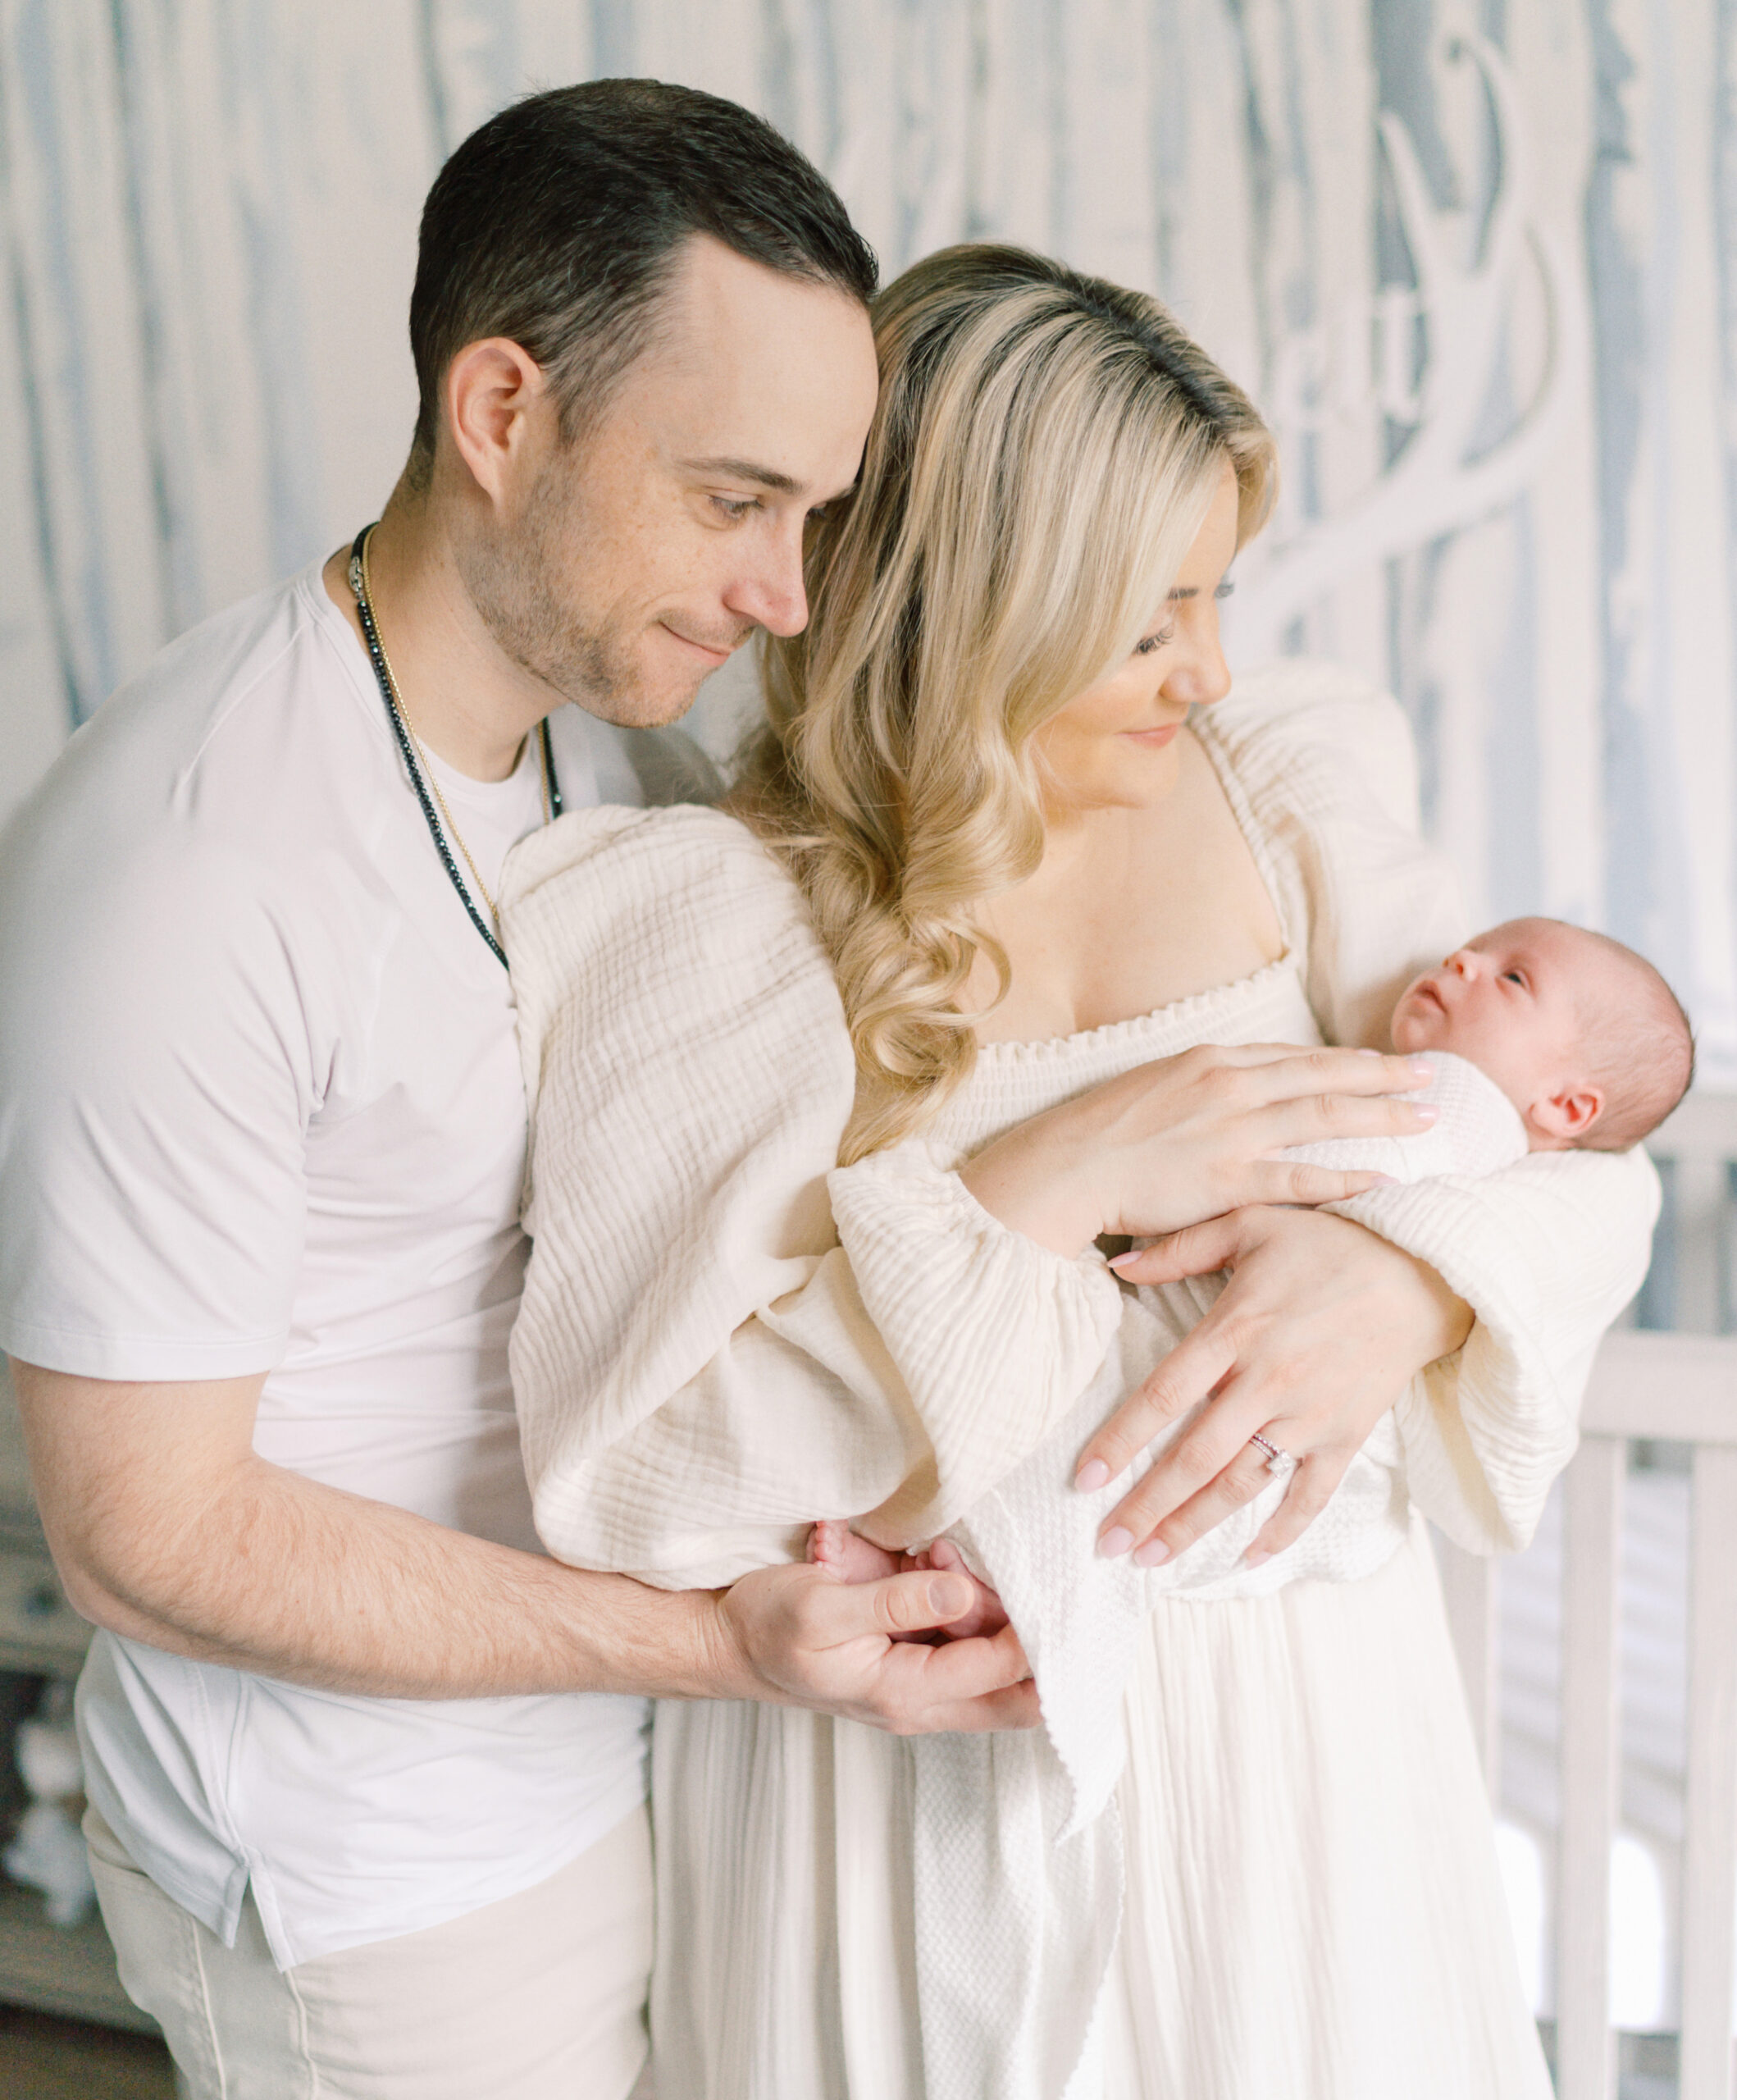 College Grove TN newborn photographer Courtney Houk captures a photo of first time parents with the newborn baby boy